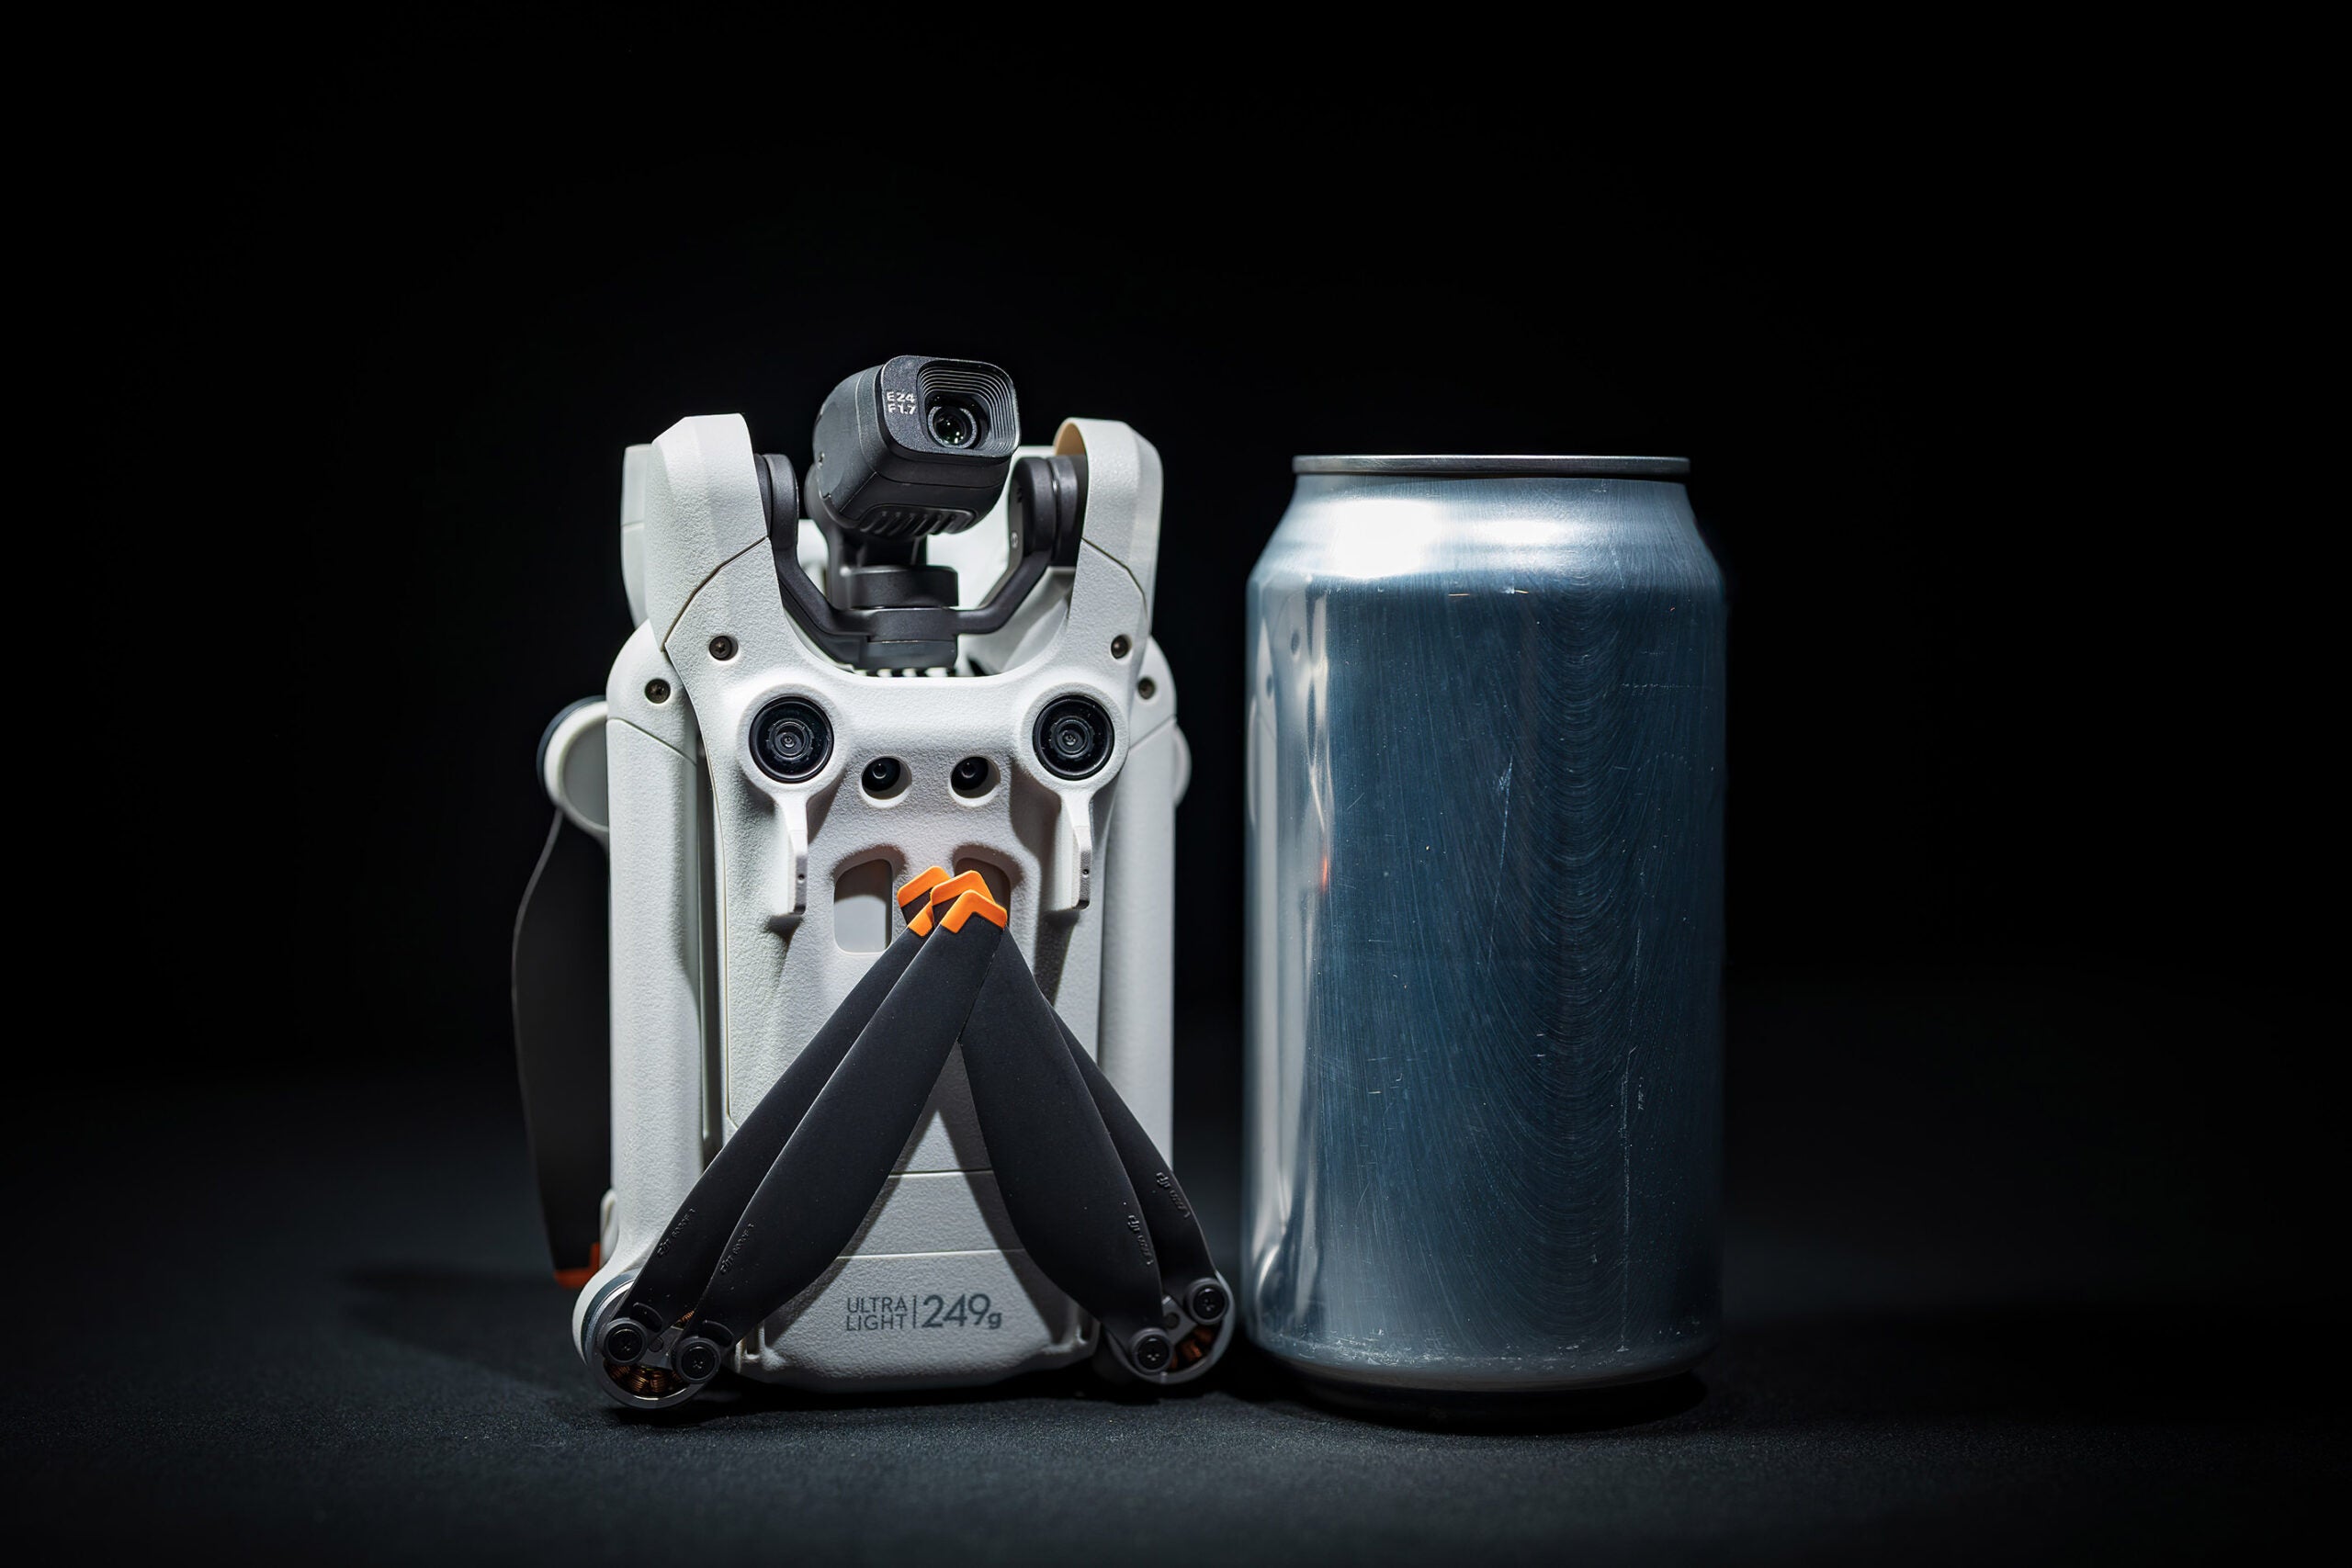 The DJI Mini 3 Pro is slightly larger than a can of soda, but weighs about 125 grams less